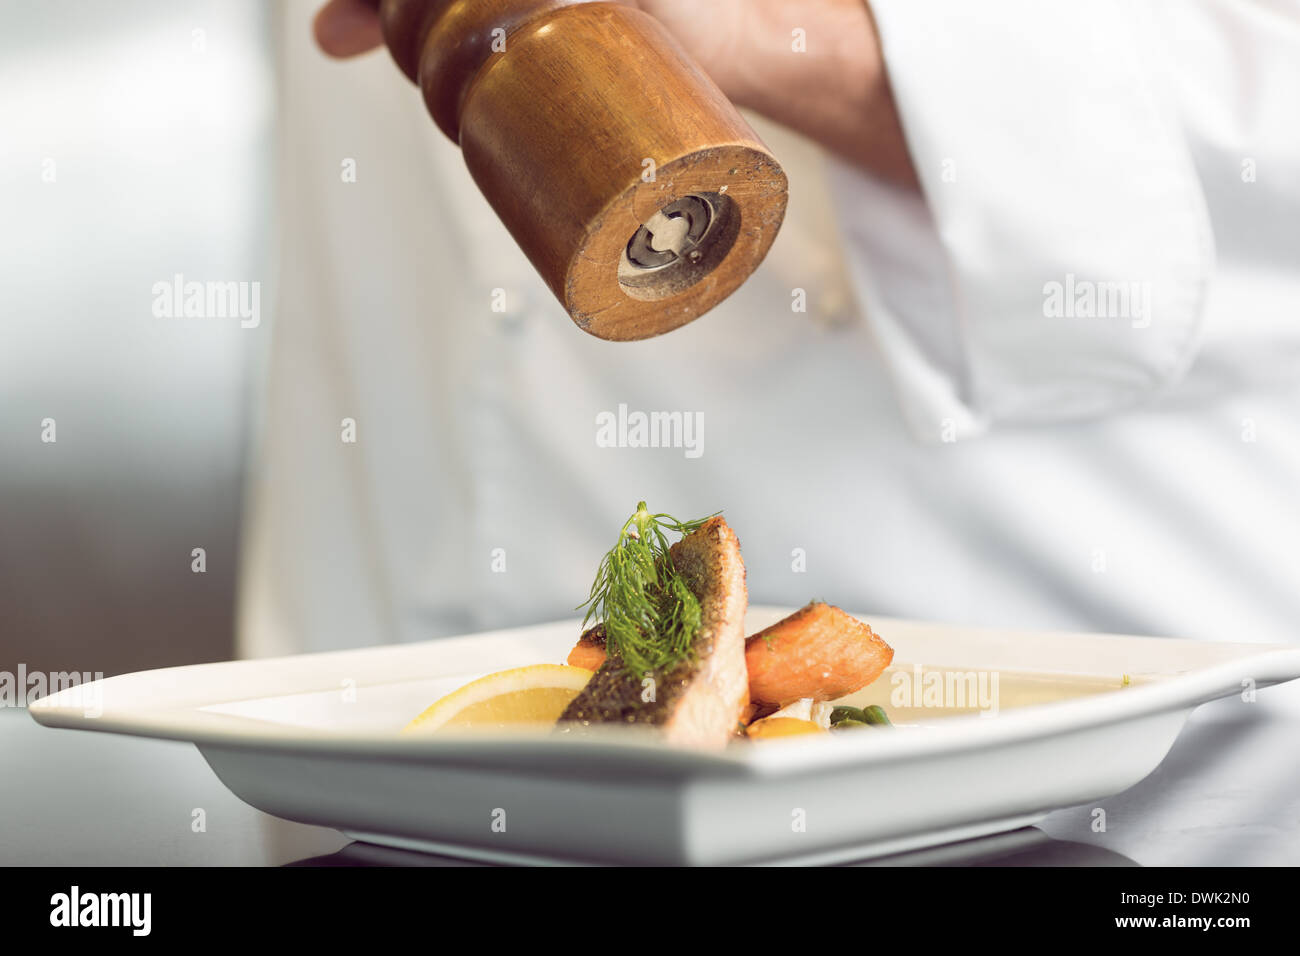 Closeup shot of hands grinding pepper on food Stock Photo